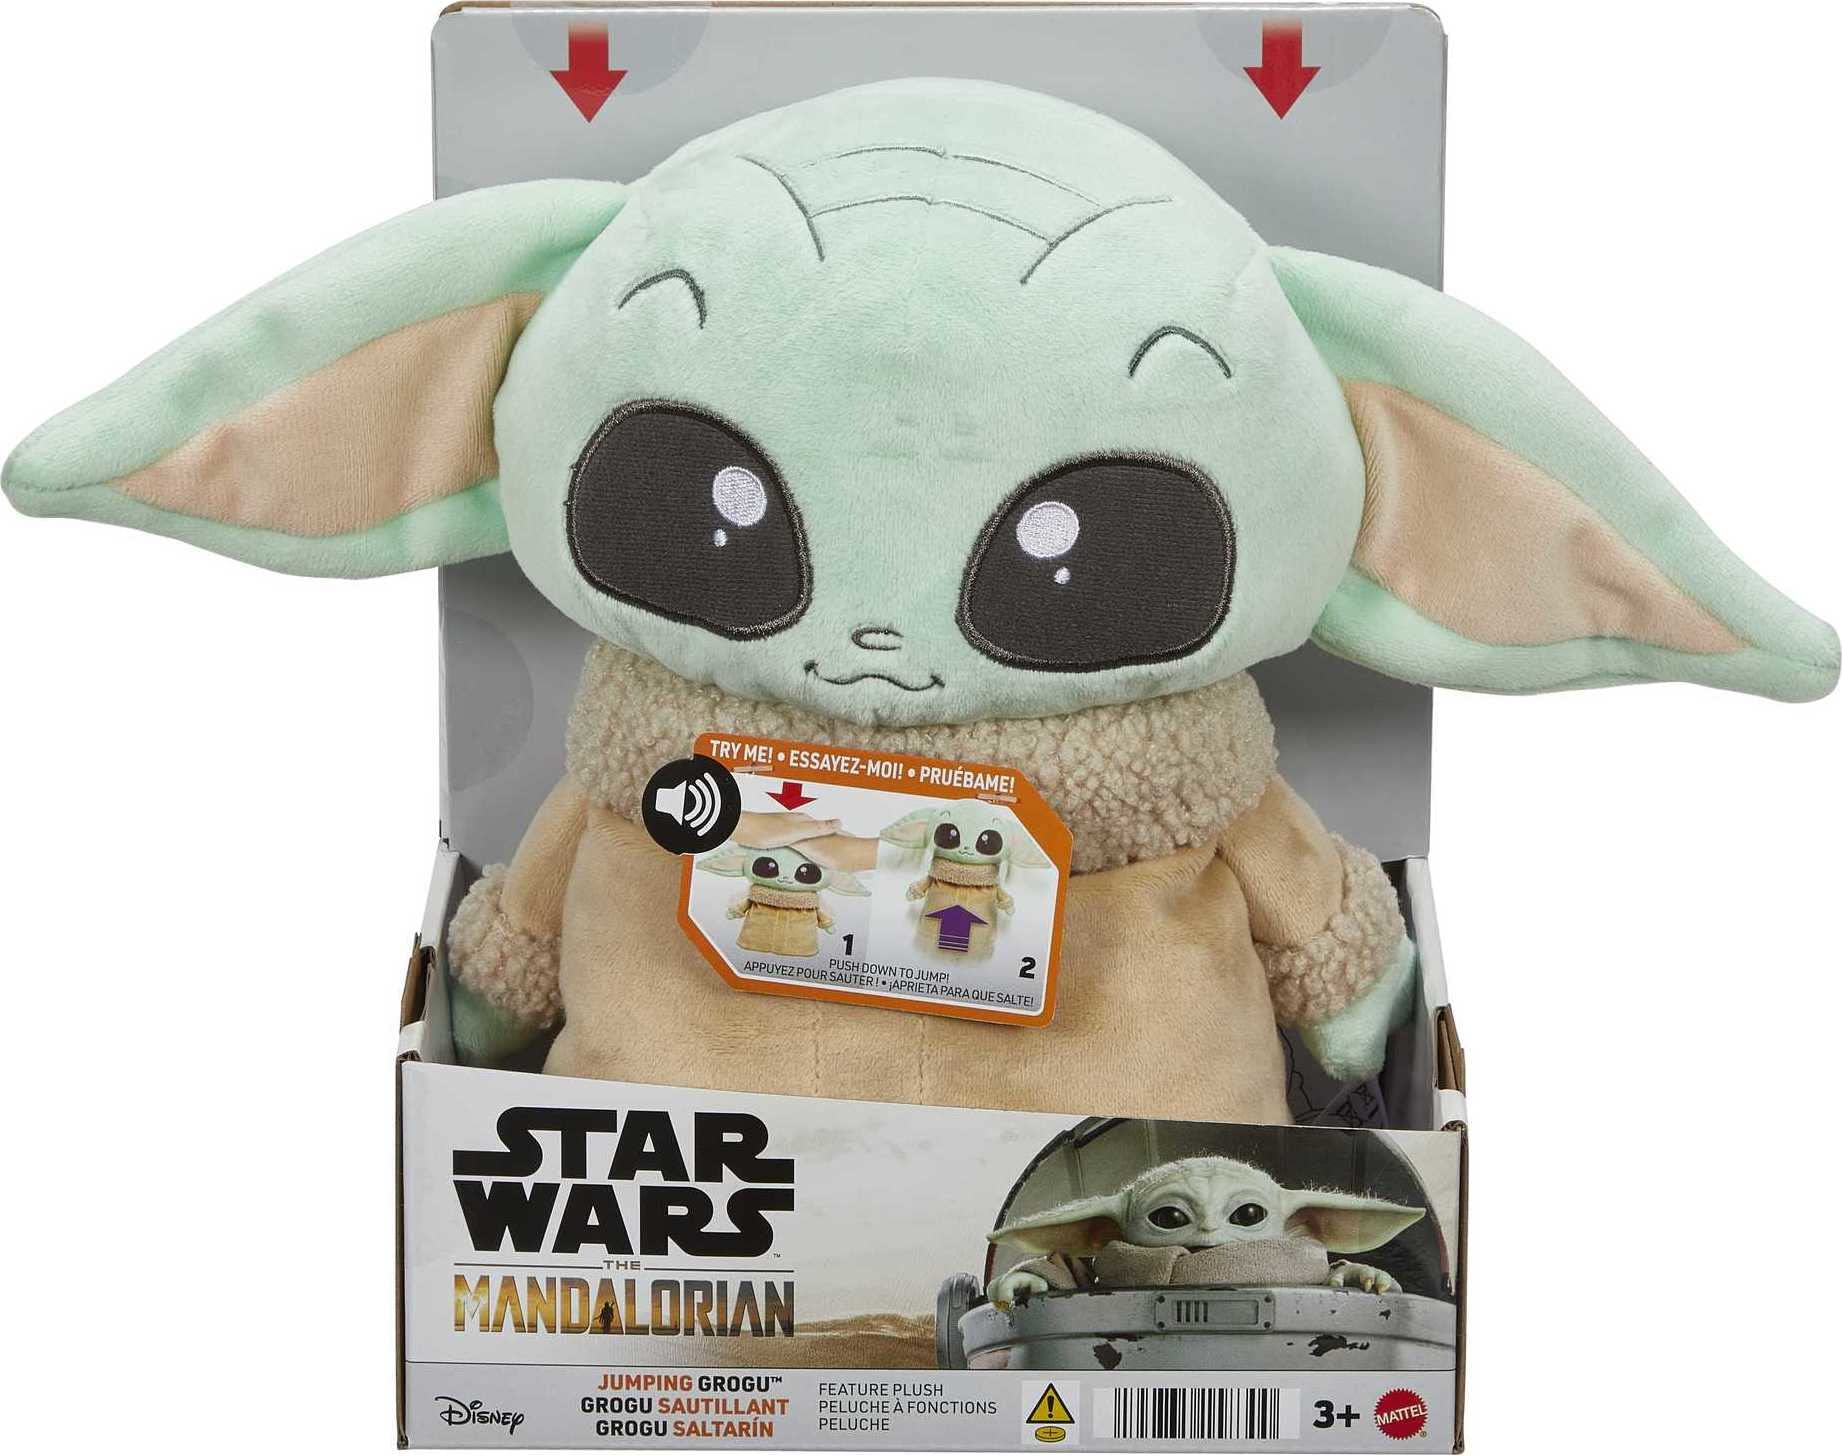 11" Mattel ​Star Wars Jumping Grogu Plush Toy with Jumping Action and Sounds, Soft Doll Inspired by Star Wars $11.66 + Free Shipping w/ Prime or on $35+